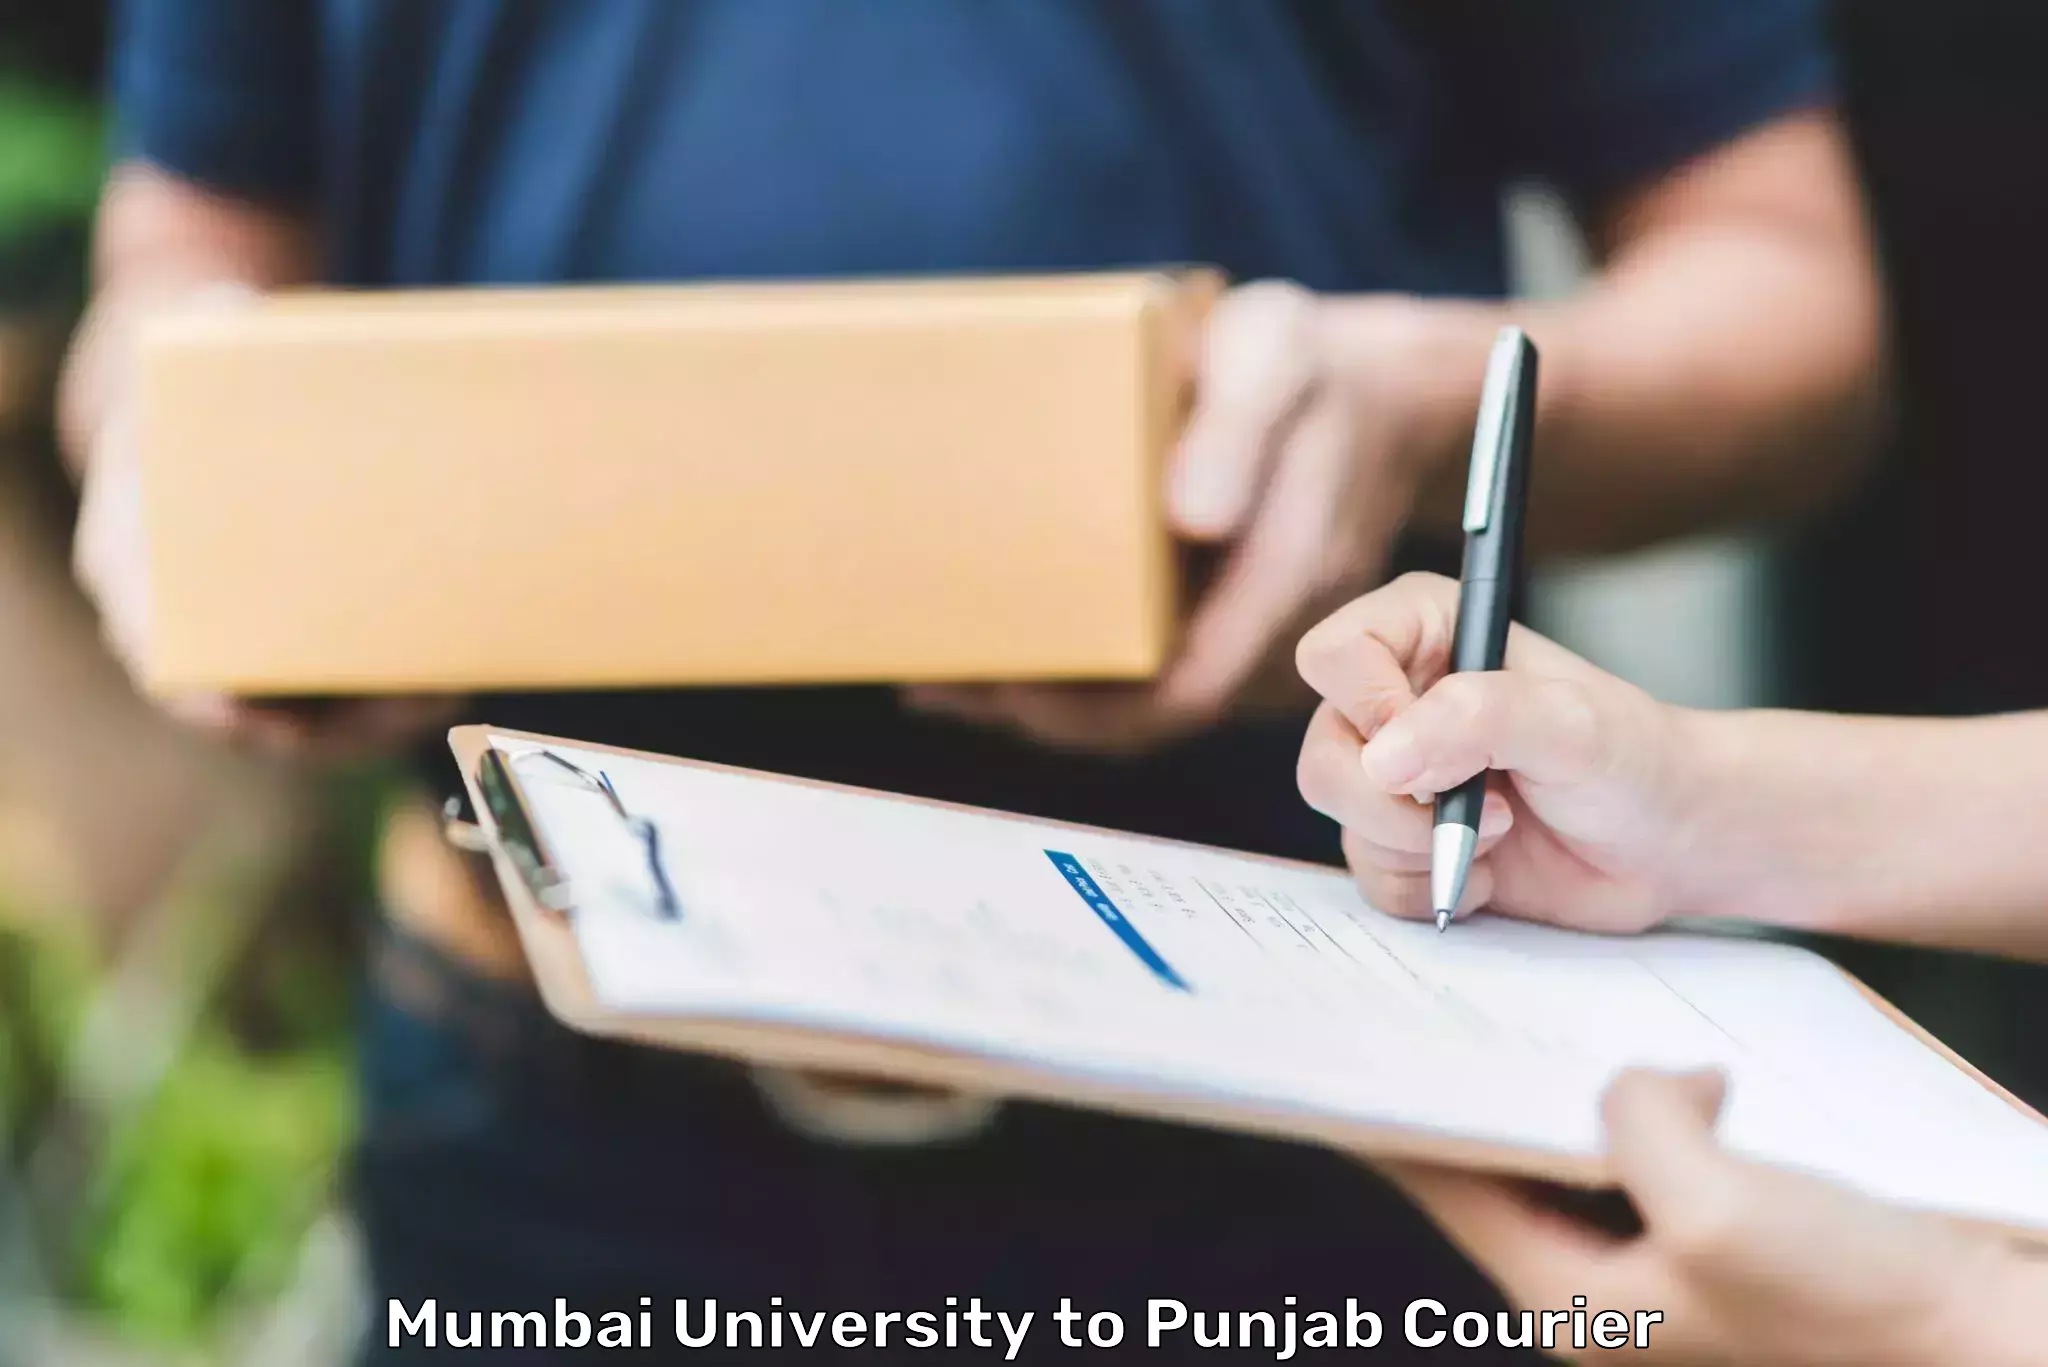 Secure freight services in Mumbai University to Patiala